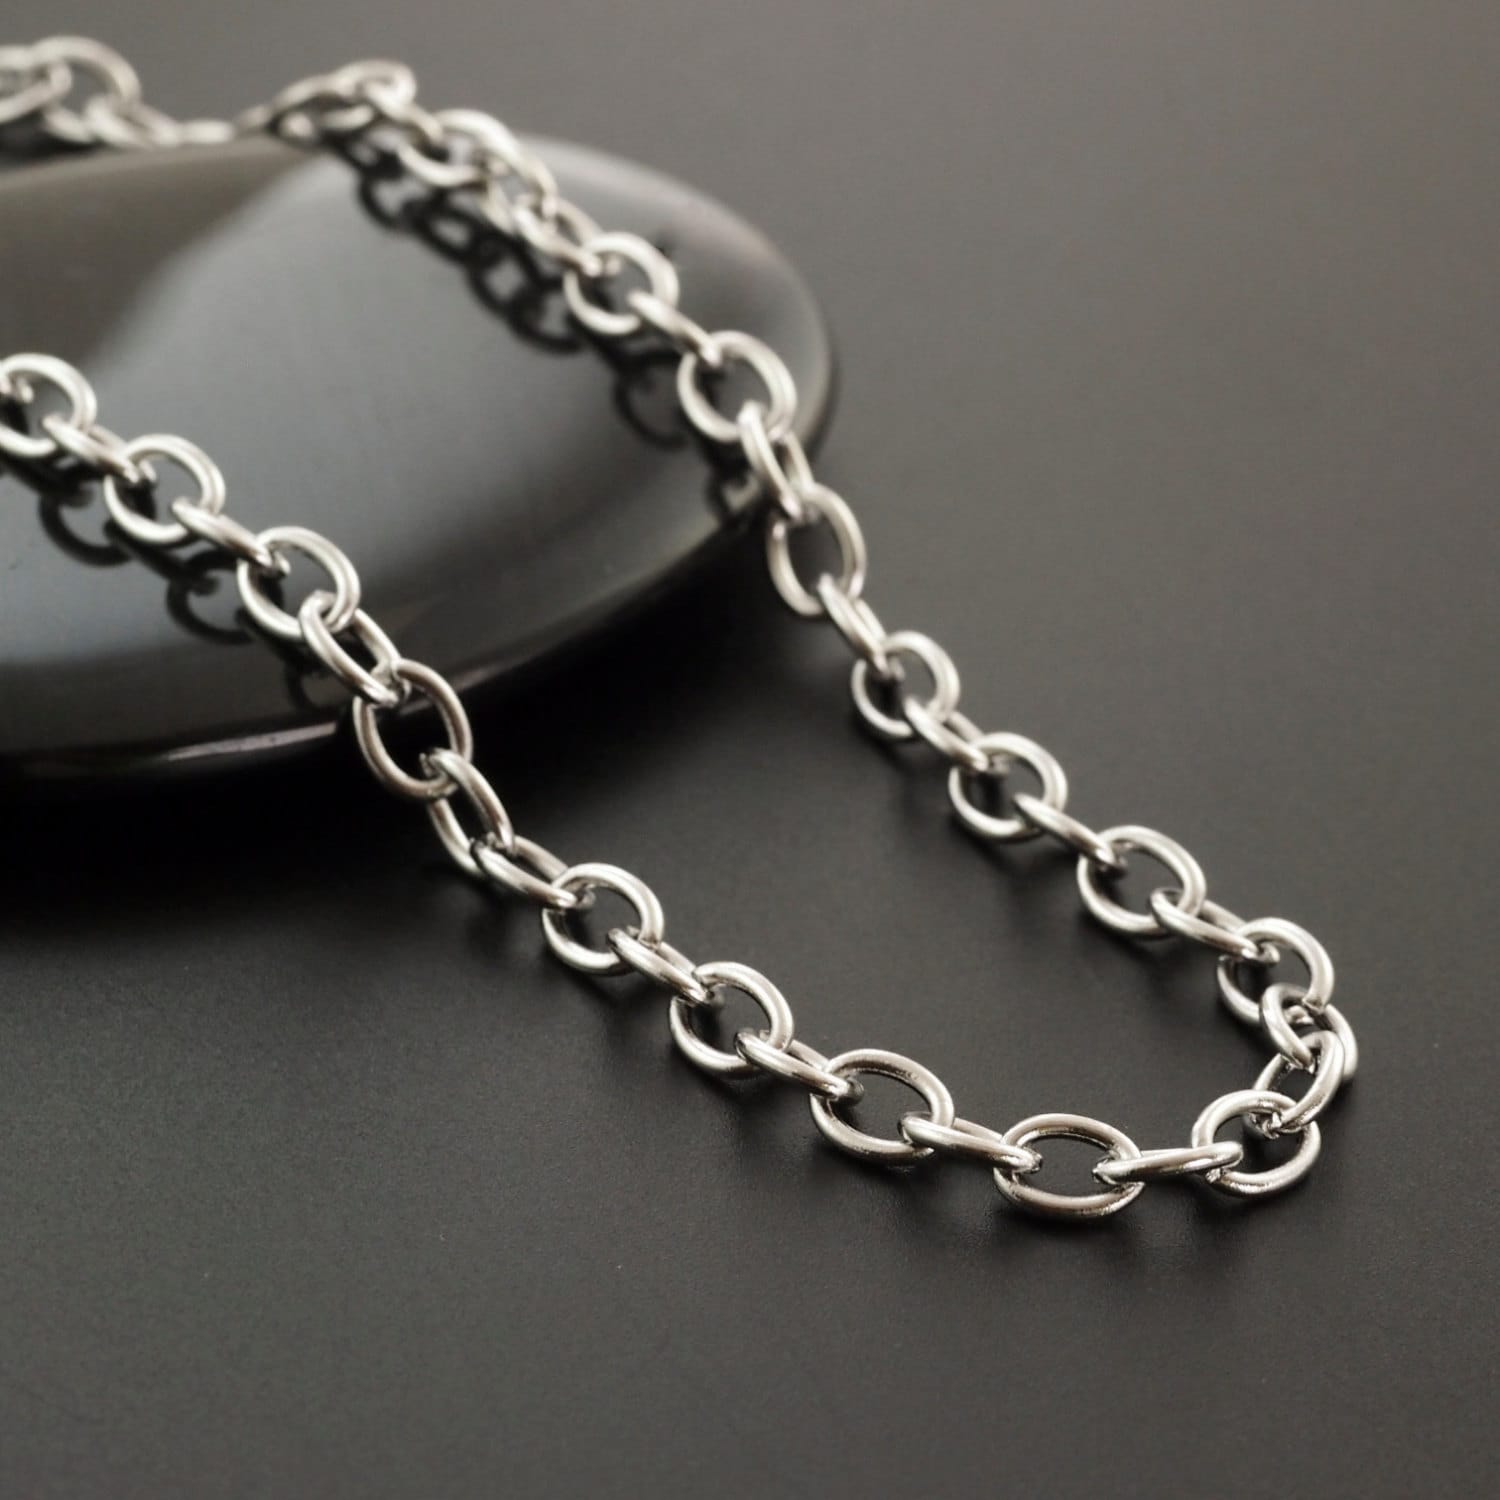 Stainless Steel Chain Bulk, 10 Ft of Surgical Stainless Steel